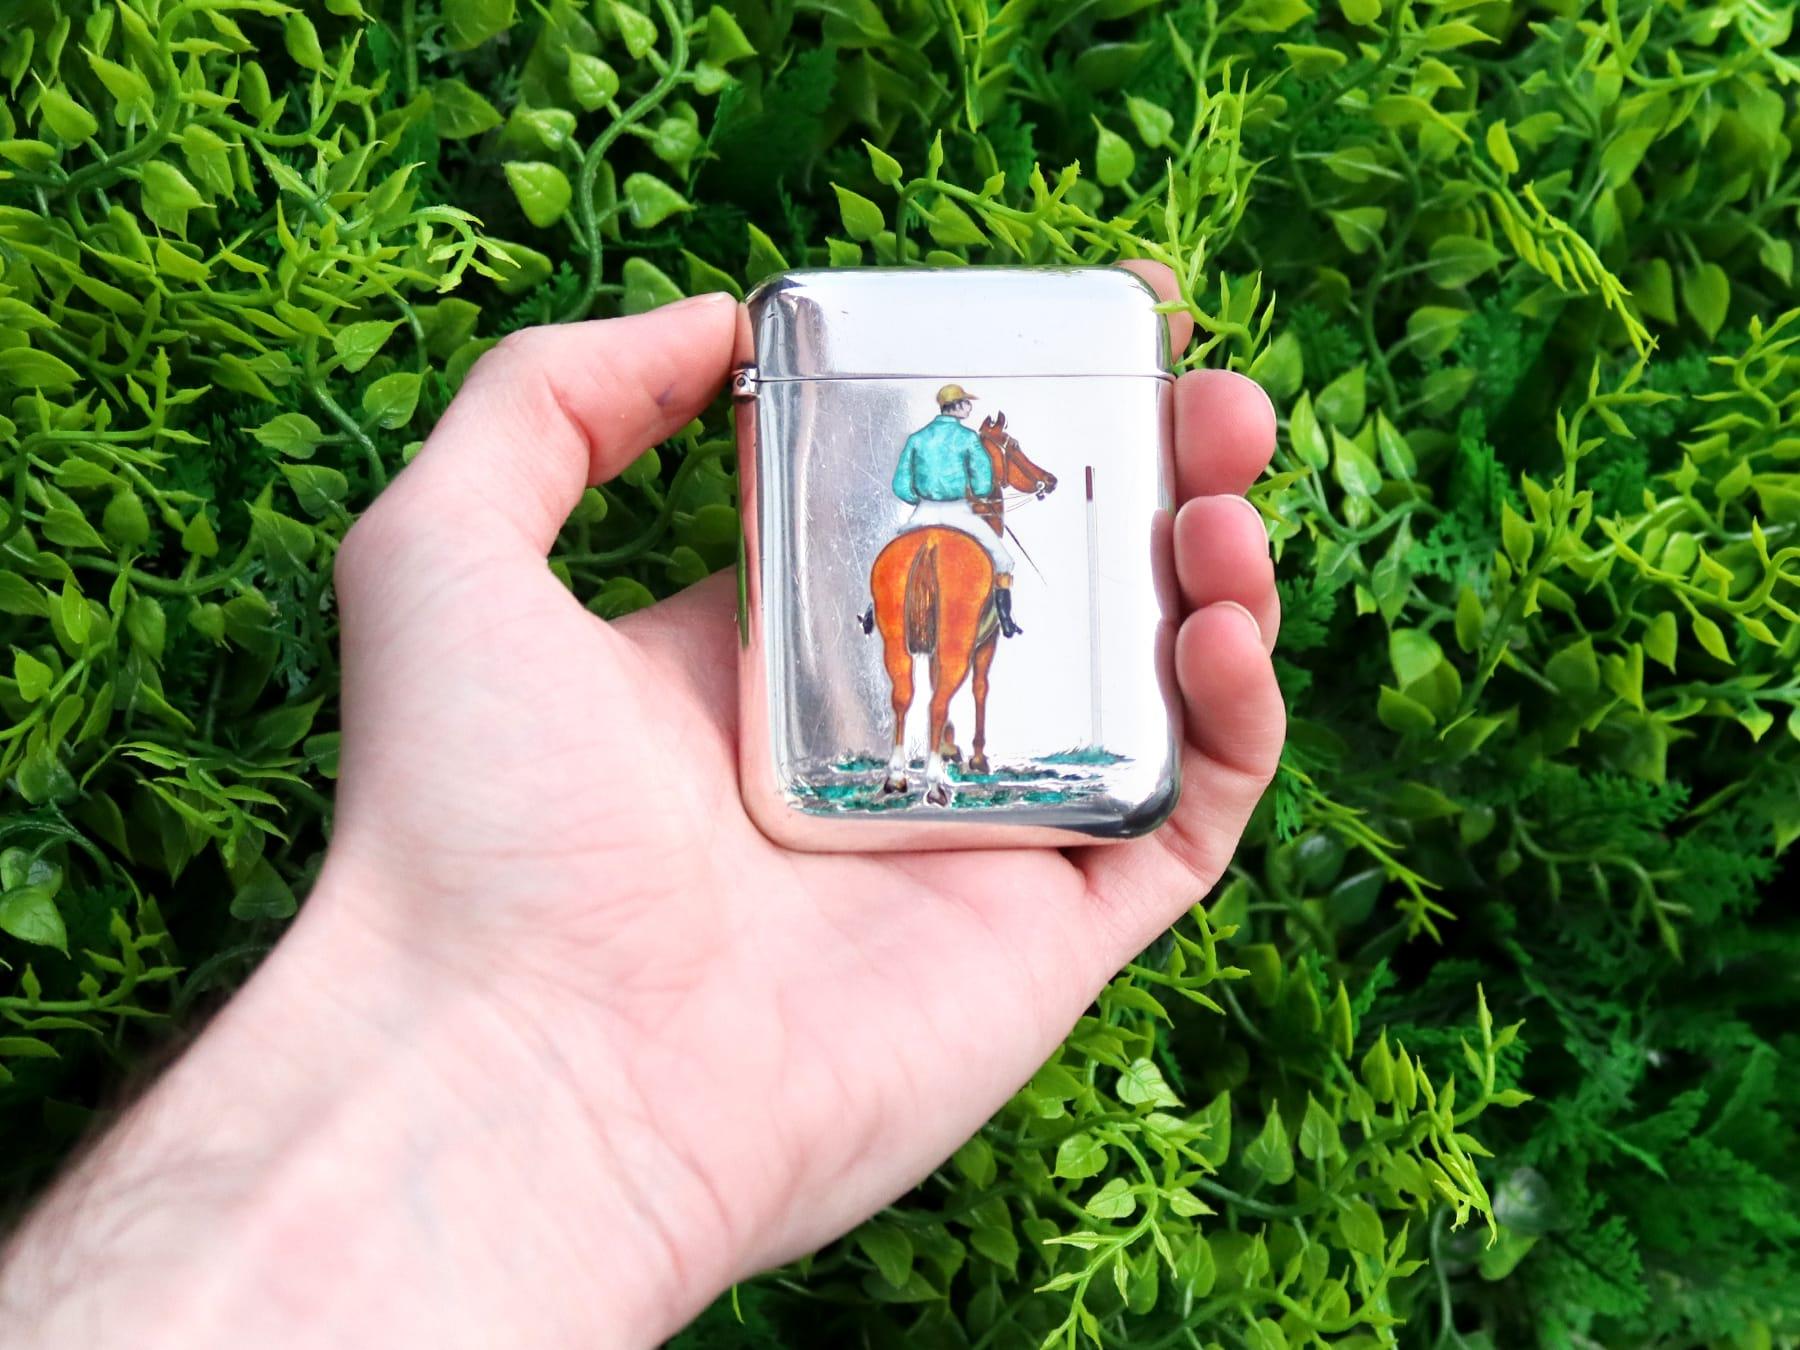 An exceptional, fine and impressive antique Victorian English sterling silver and enamel card case; an addition to our range of silver boxes and cases.

This exceptional antique Victorian sterling silver card case has a rectangular form with